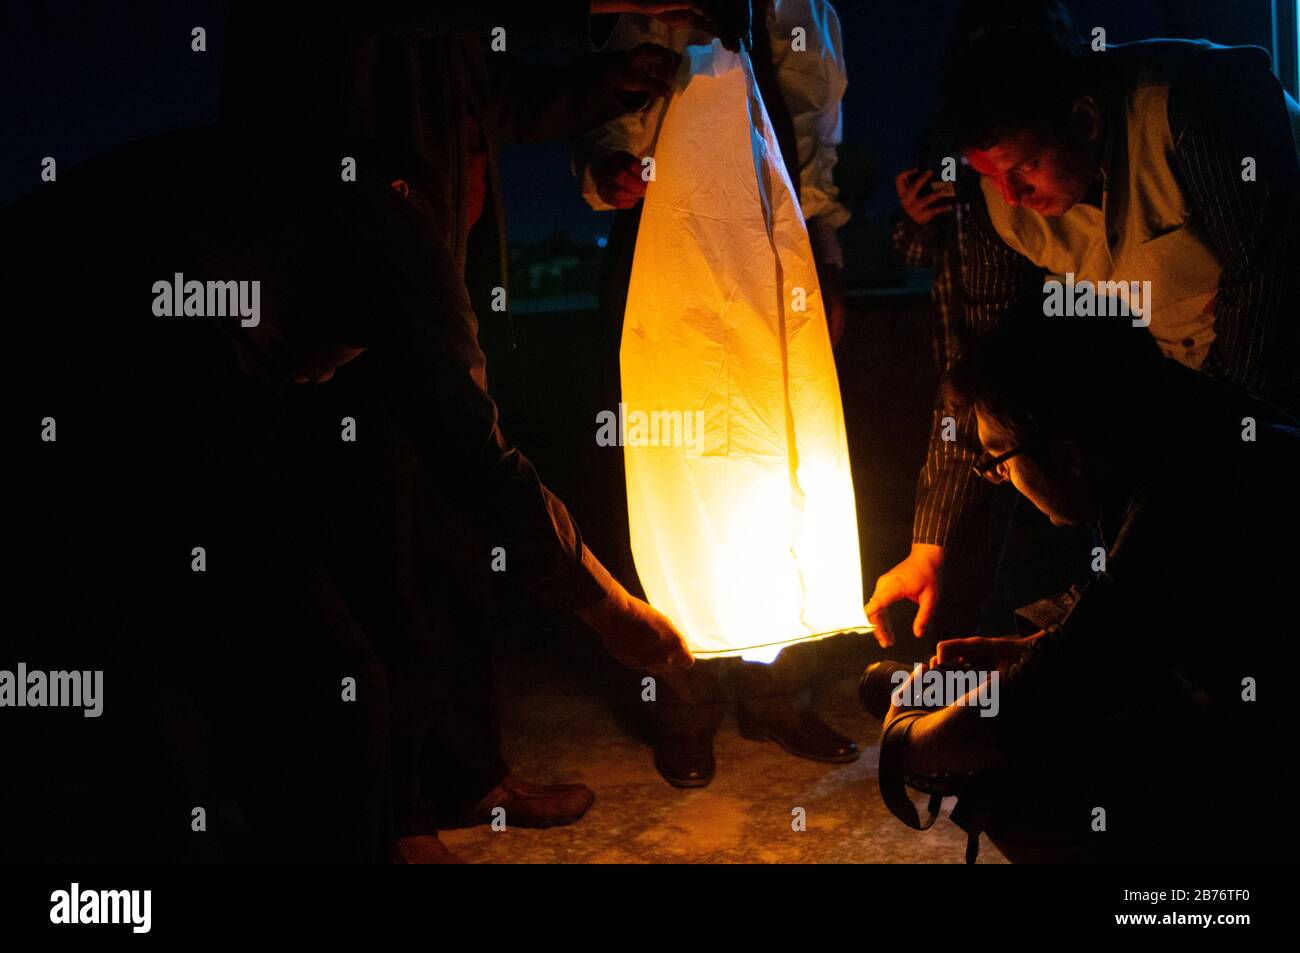 Jaipur India, Circa 2020 - Photograph of a yellow Sky lantern held by people and waiting for it to lift off. The flames are clearly visible in the pho Stock Photo